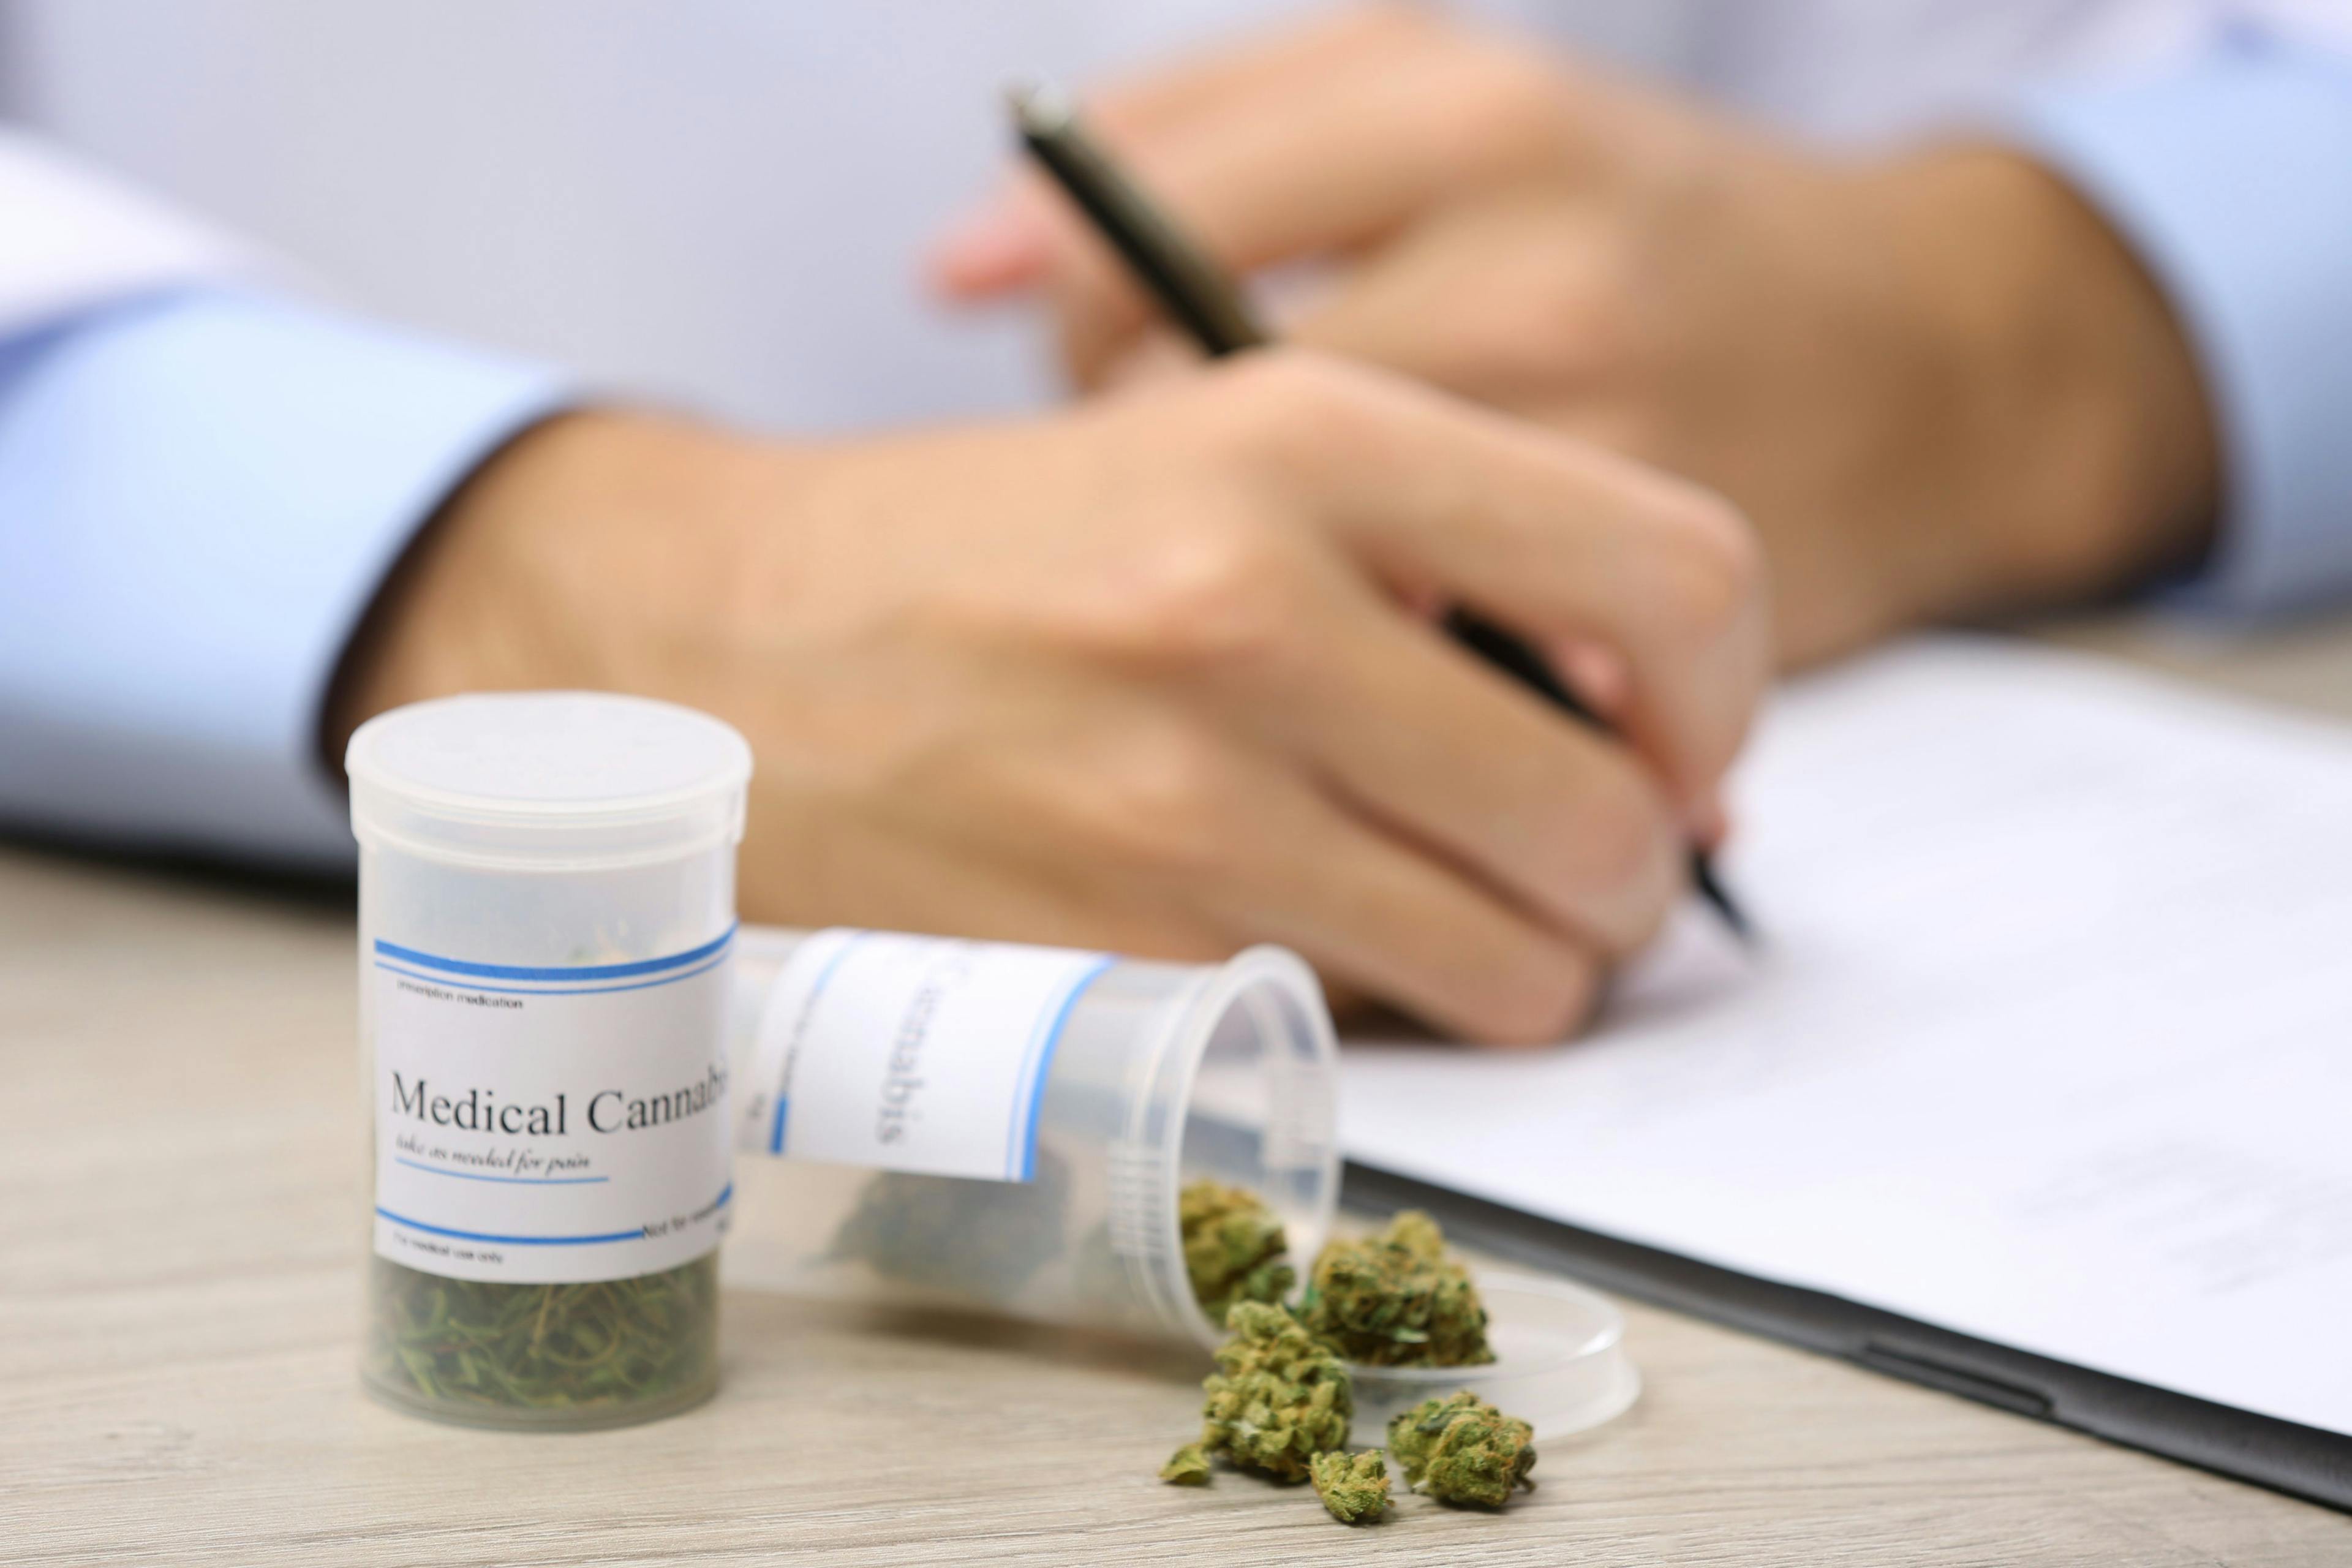  The Role of the Pharmacist in Cannabis Legalization